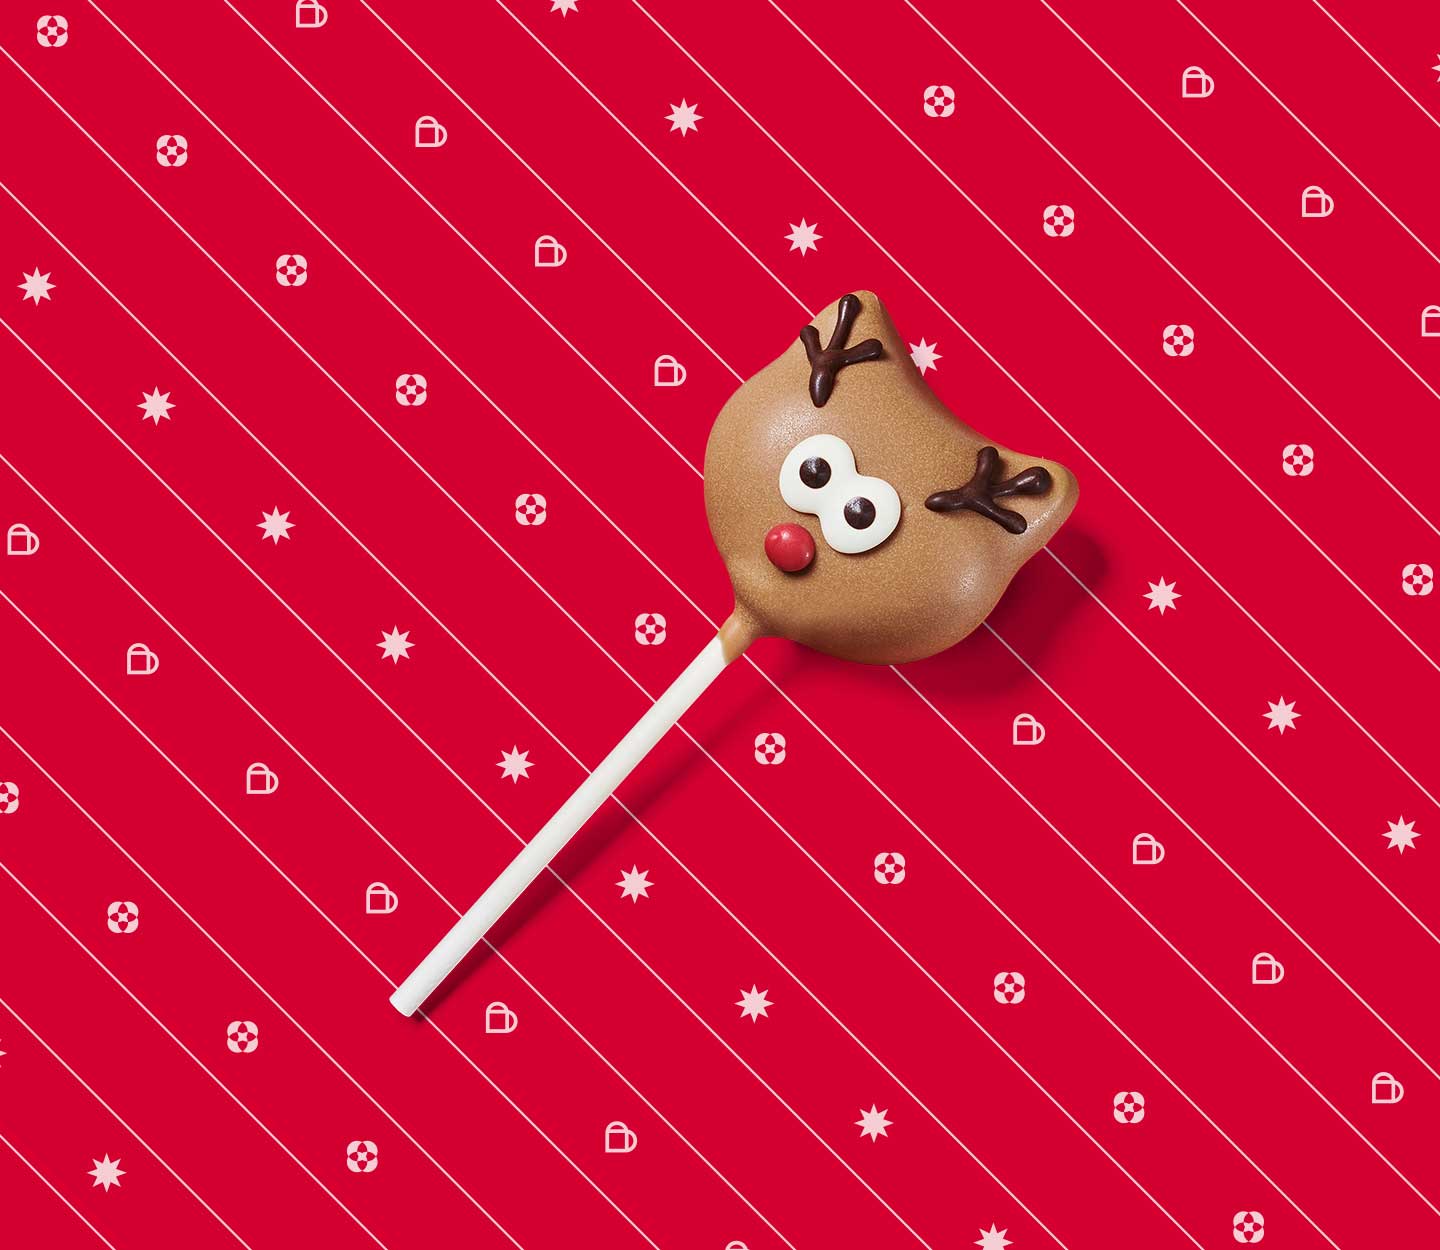 Cake pop decorated to look like a reindeer face with antlers, eyes and a red nose.